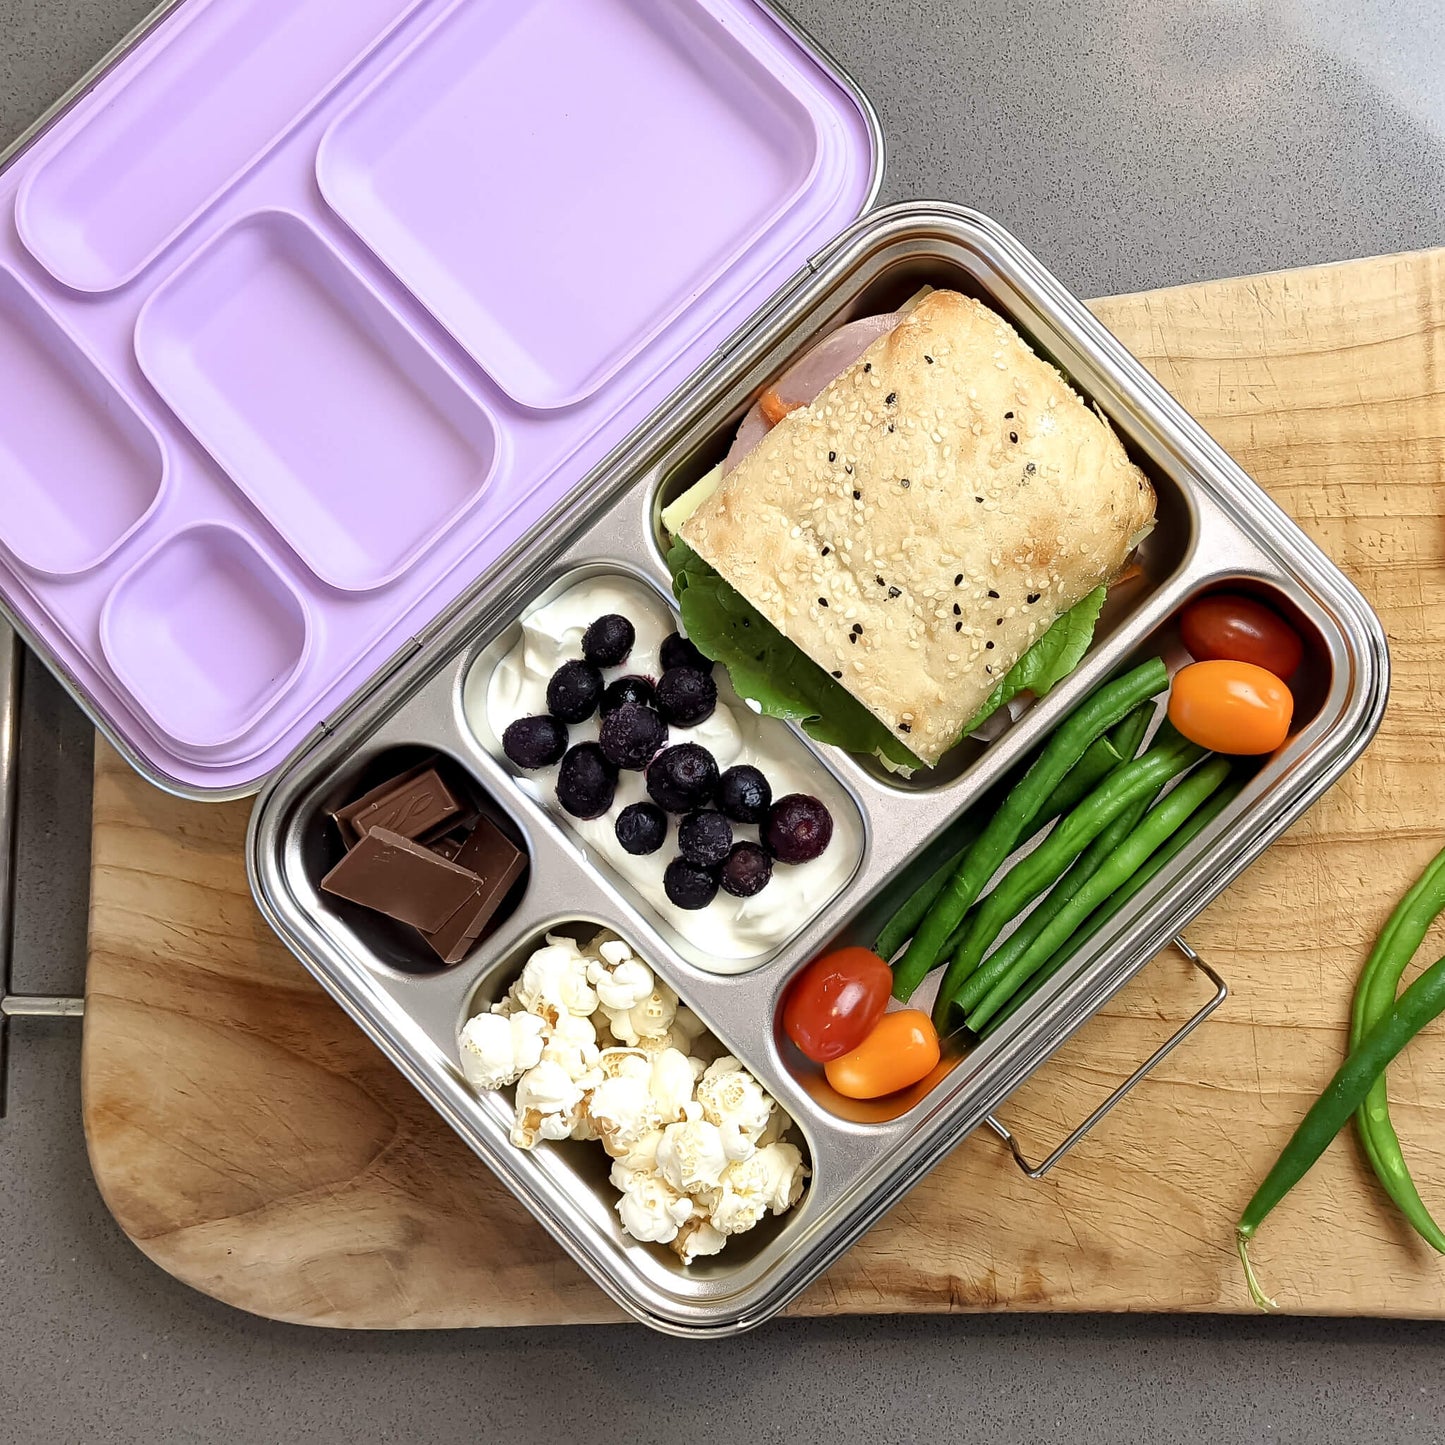 Ecococoon Stainless Steel Leakproof Bento Box - 5 compartment - Grape